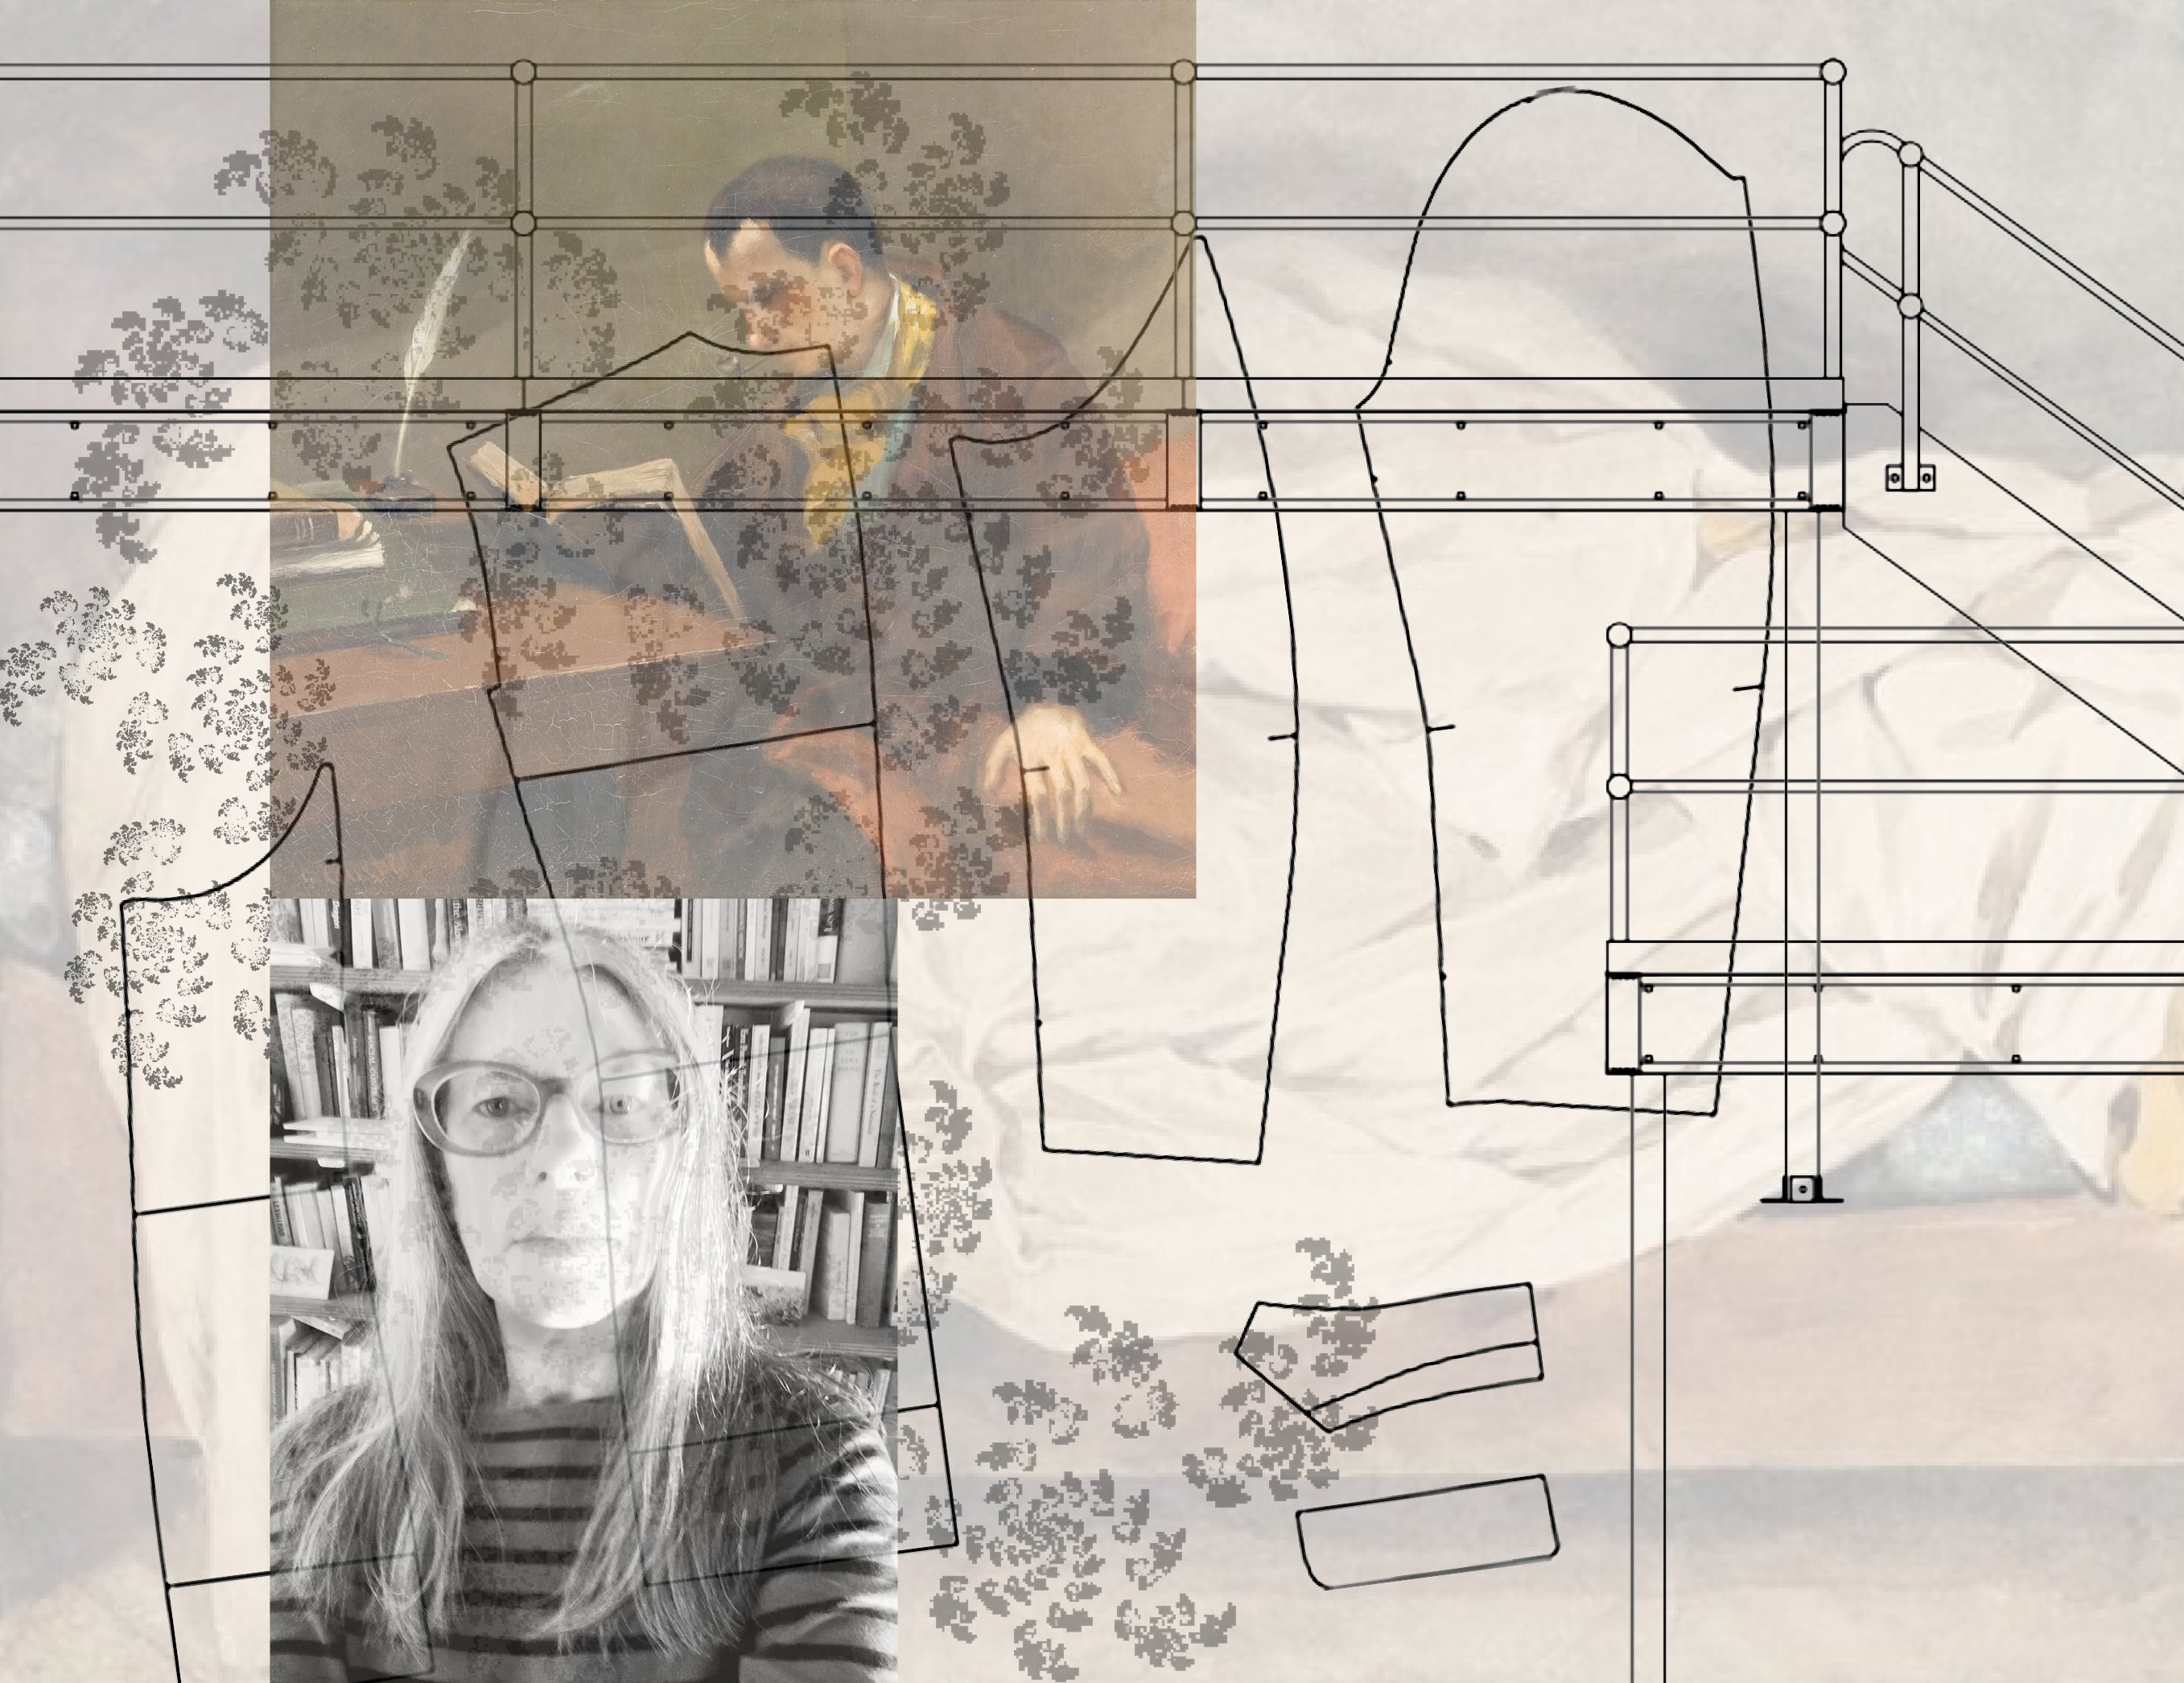 Abstract image of a middle-aged woman in glasses and an old-fashioned photograph of a person reading. On top of this a layer of abstract cartoon shapes.